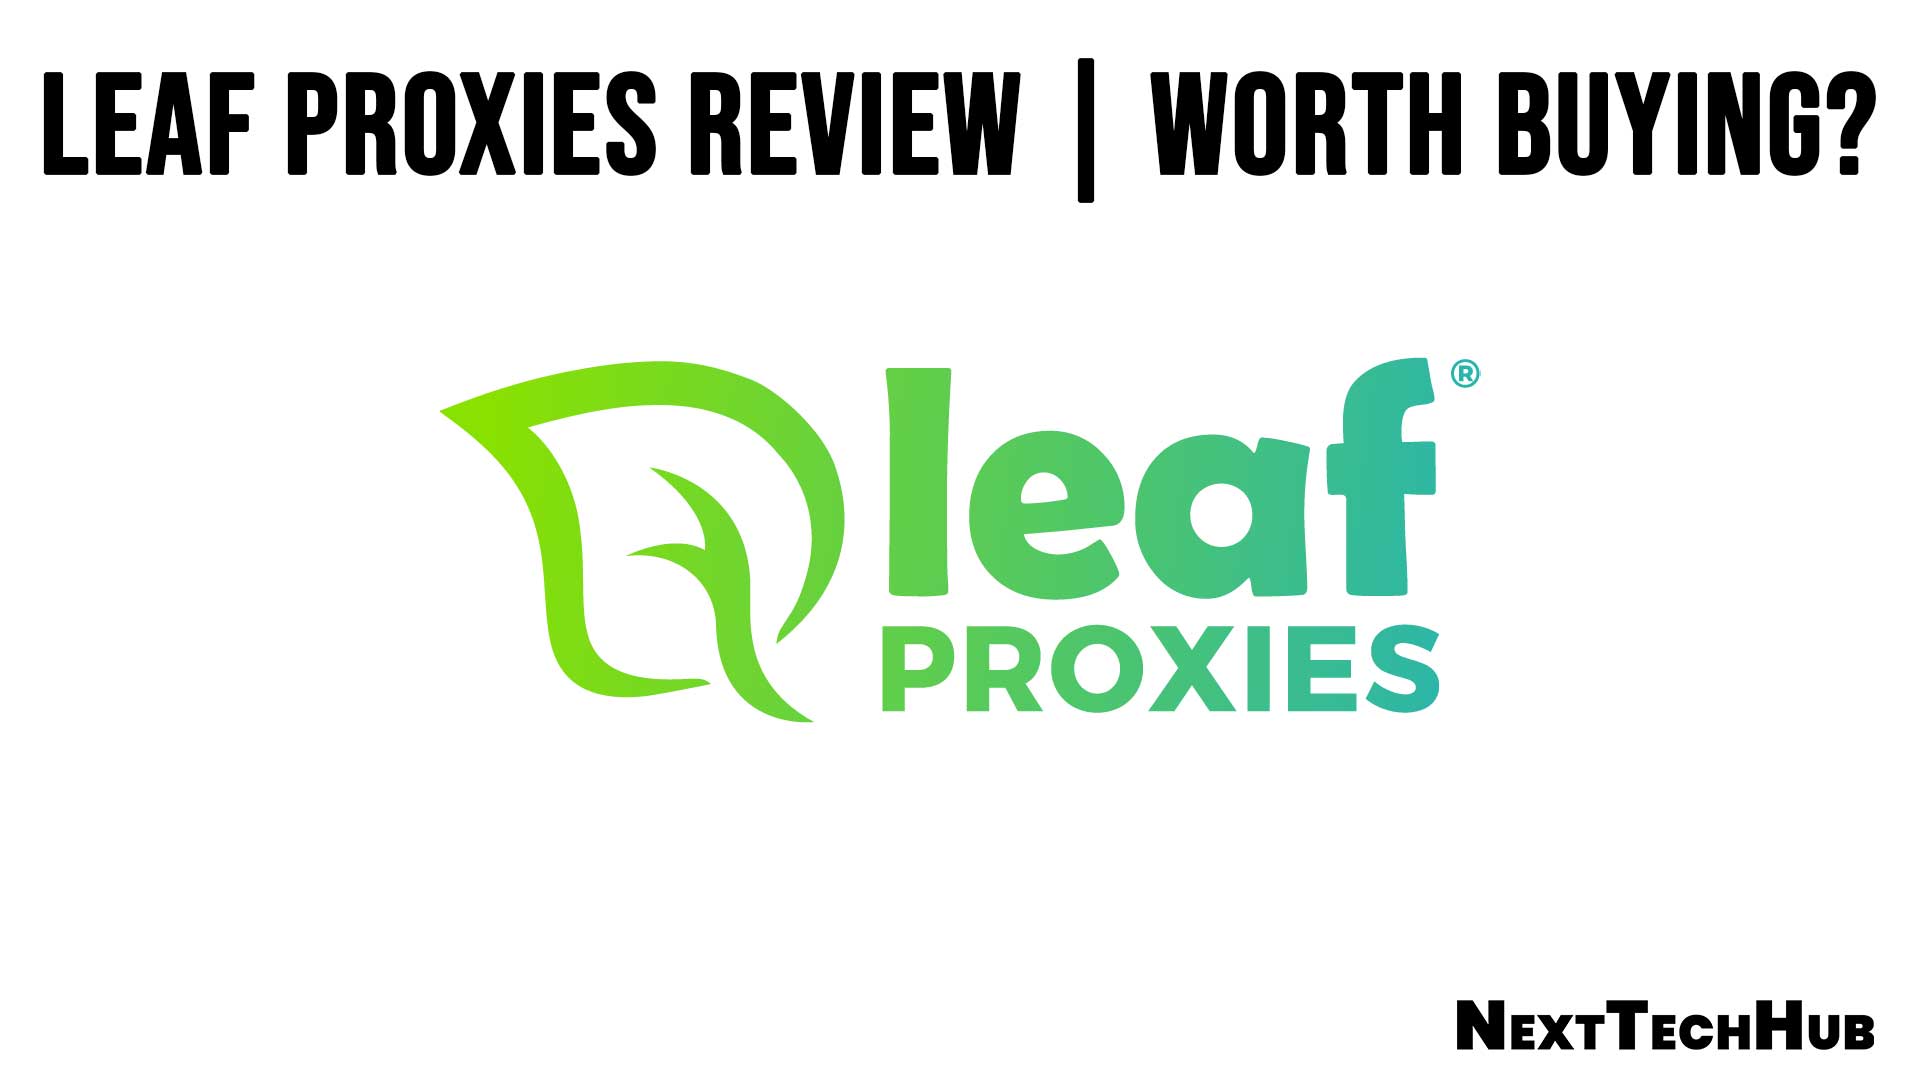 Leaf Proxies Review Worth Buying